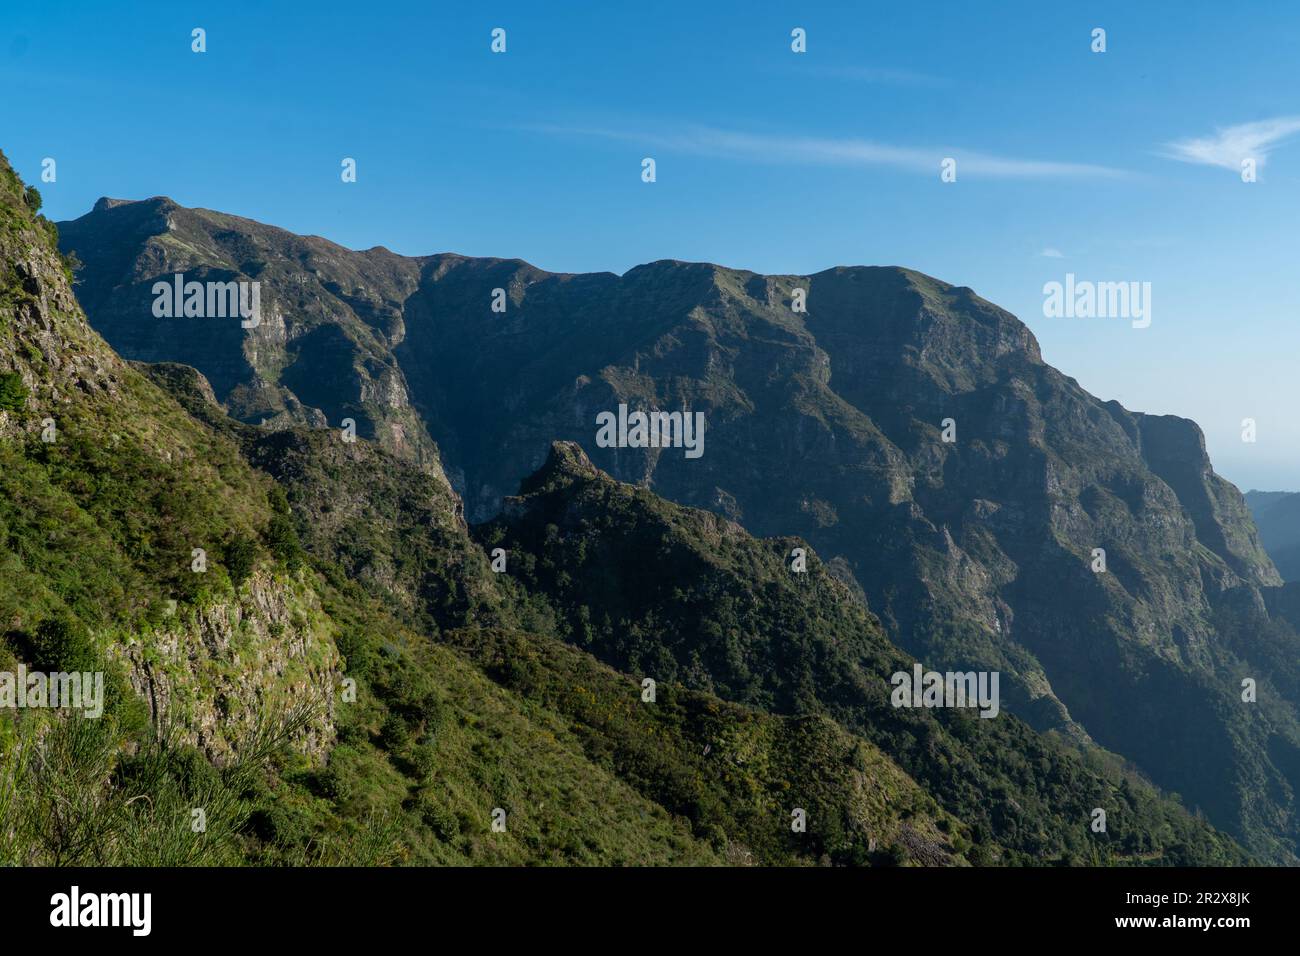 Mountain landscape. View of mountains on the route Queimadas Forestry Park - Caldeirao Verde. Madeira Island, Portugal, Europe. Stock Photo